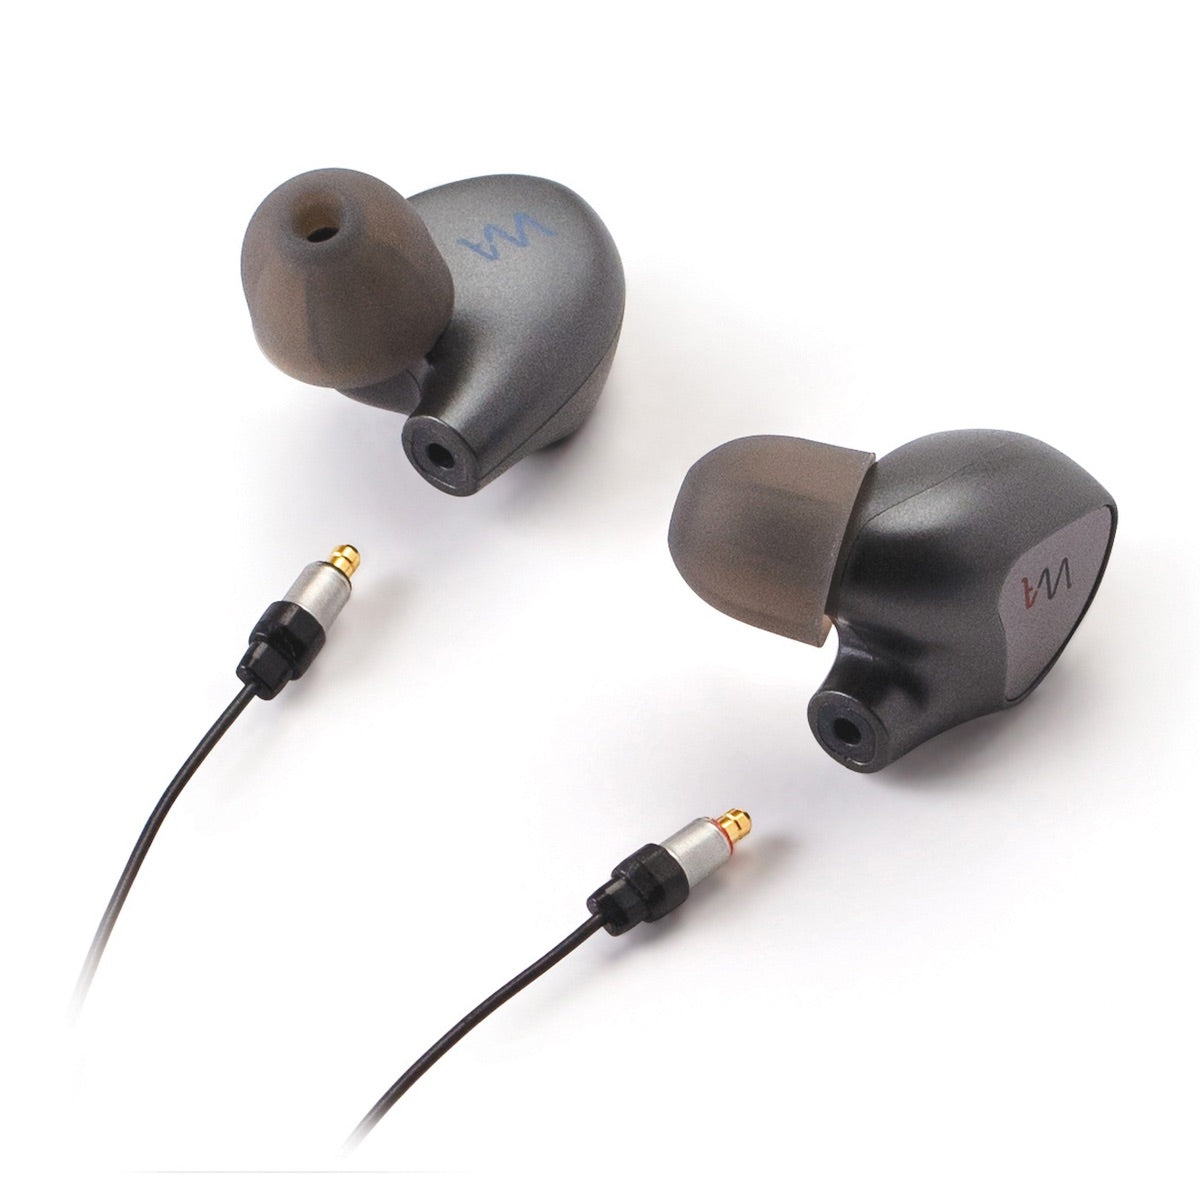 Westone MACH 10 - 1-driver Universal In-ear Monitors, T2 connector